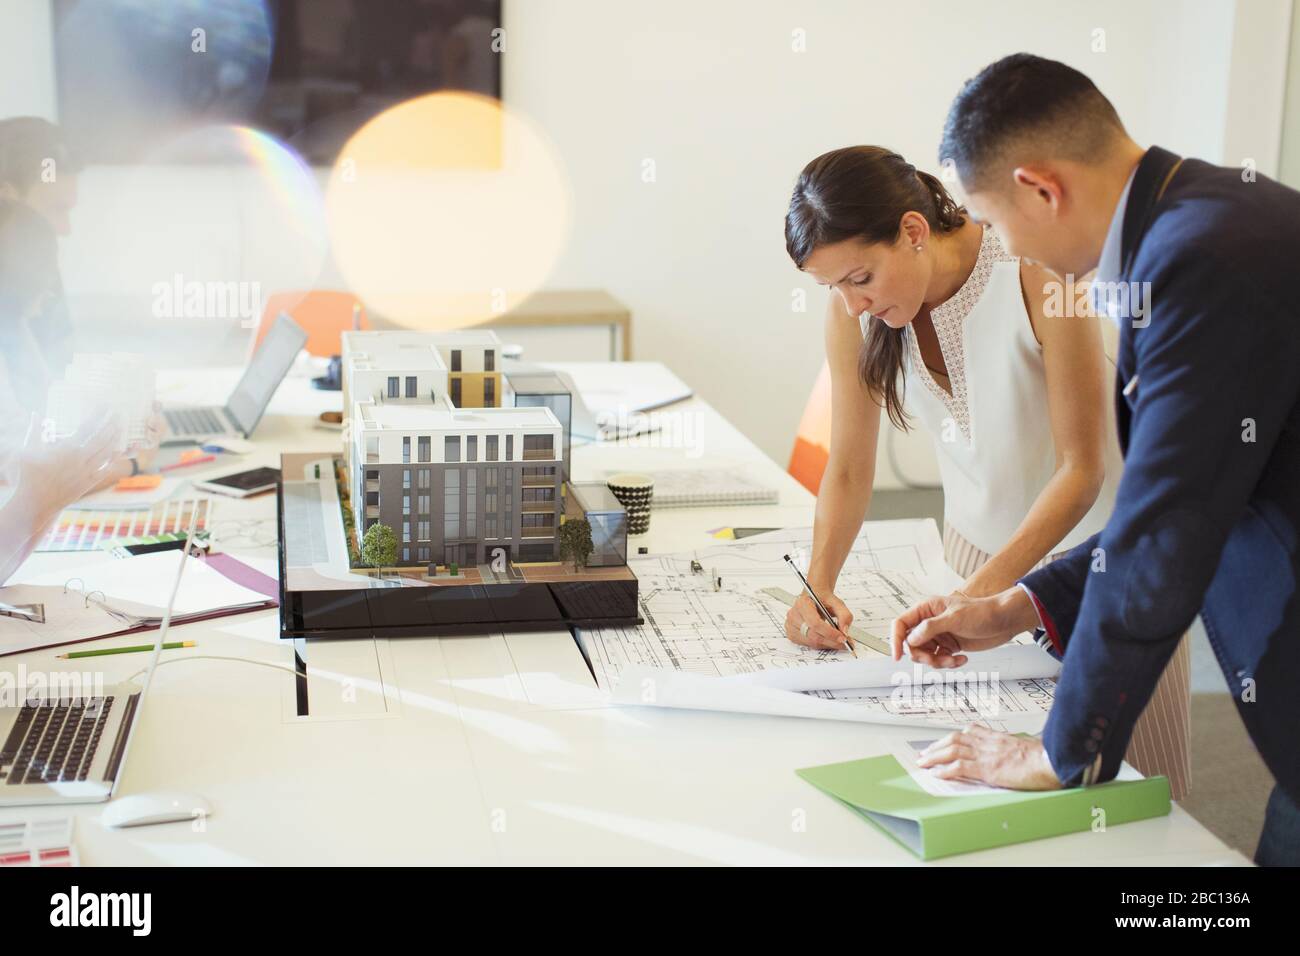 Architects drafting blueprint in conference room Stock Photo